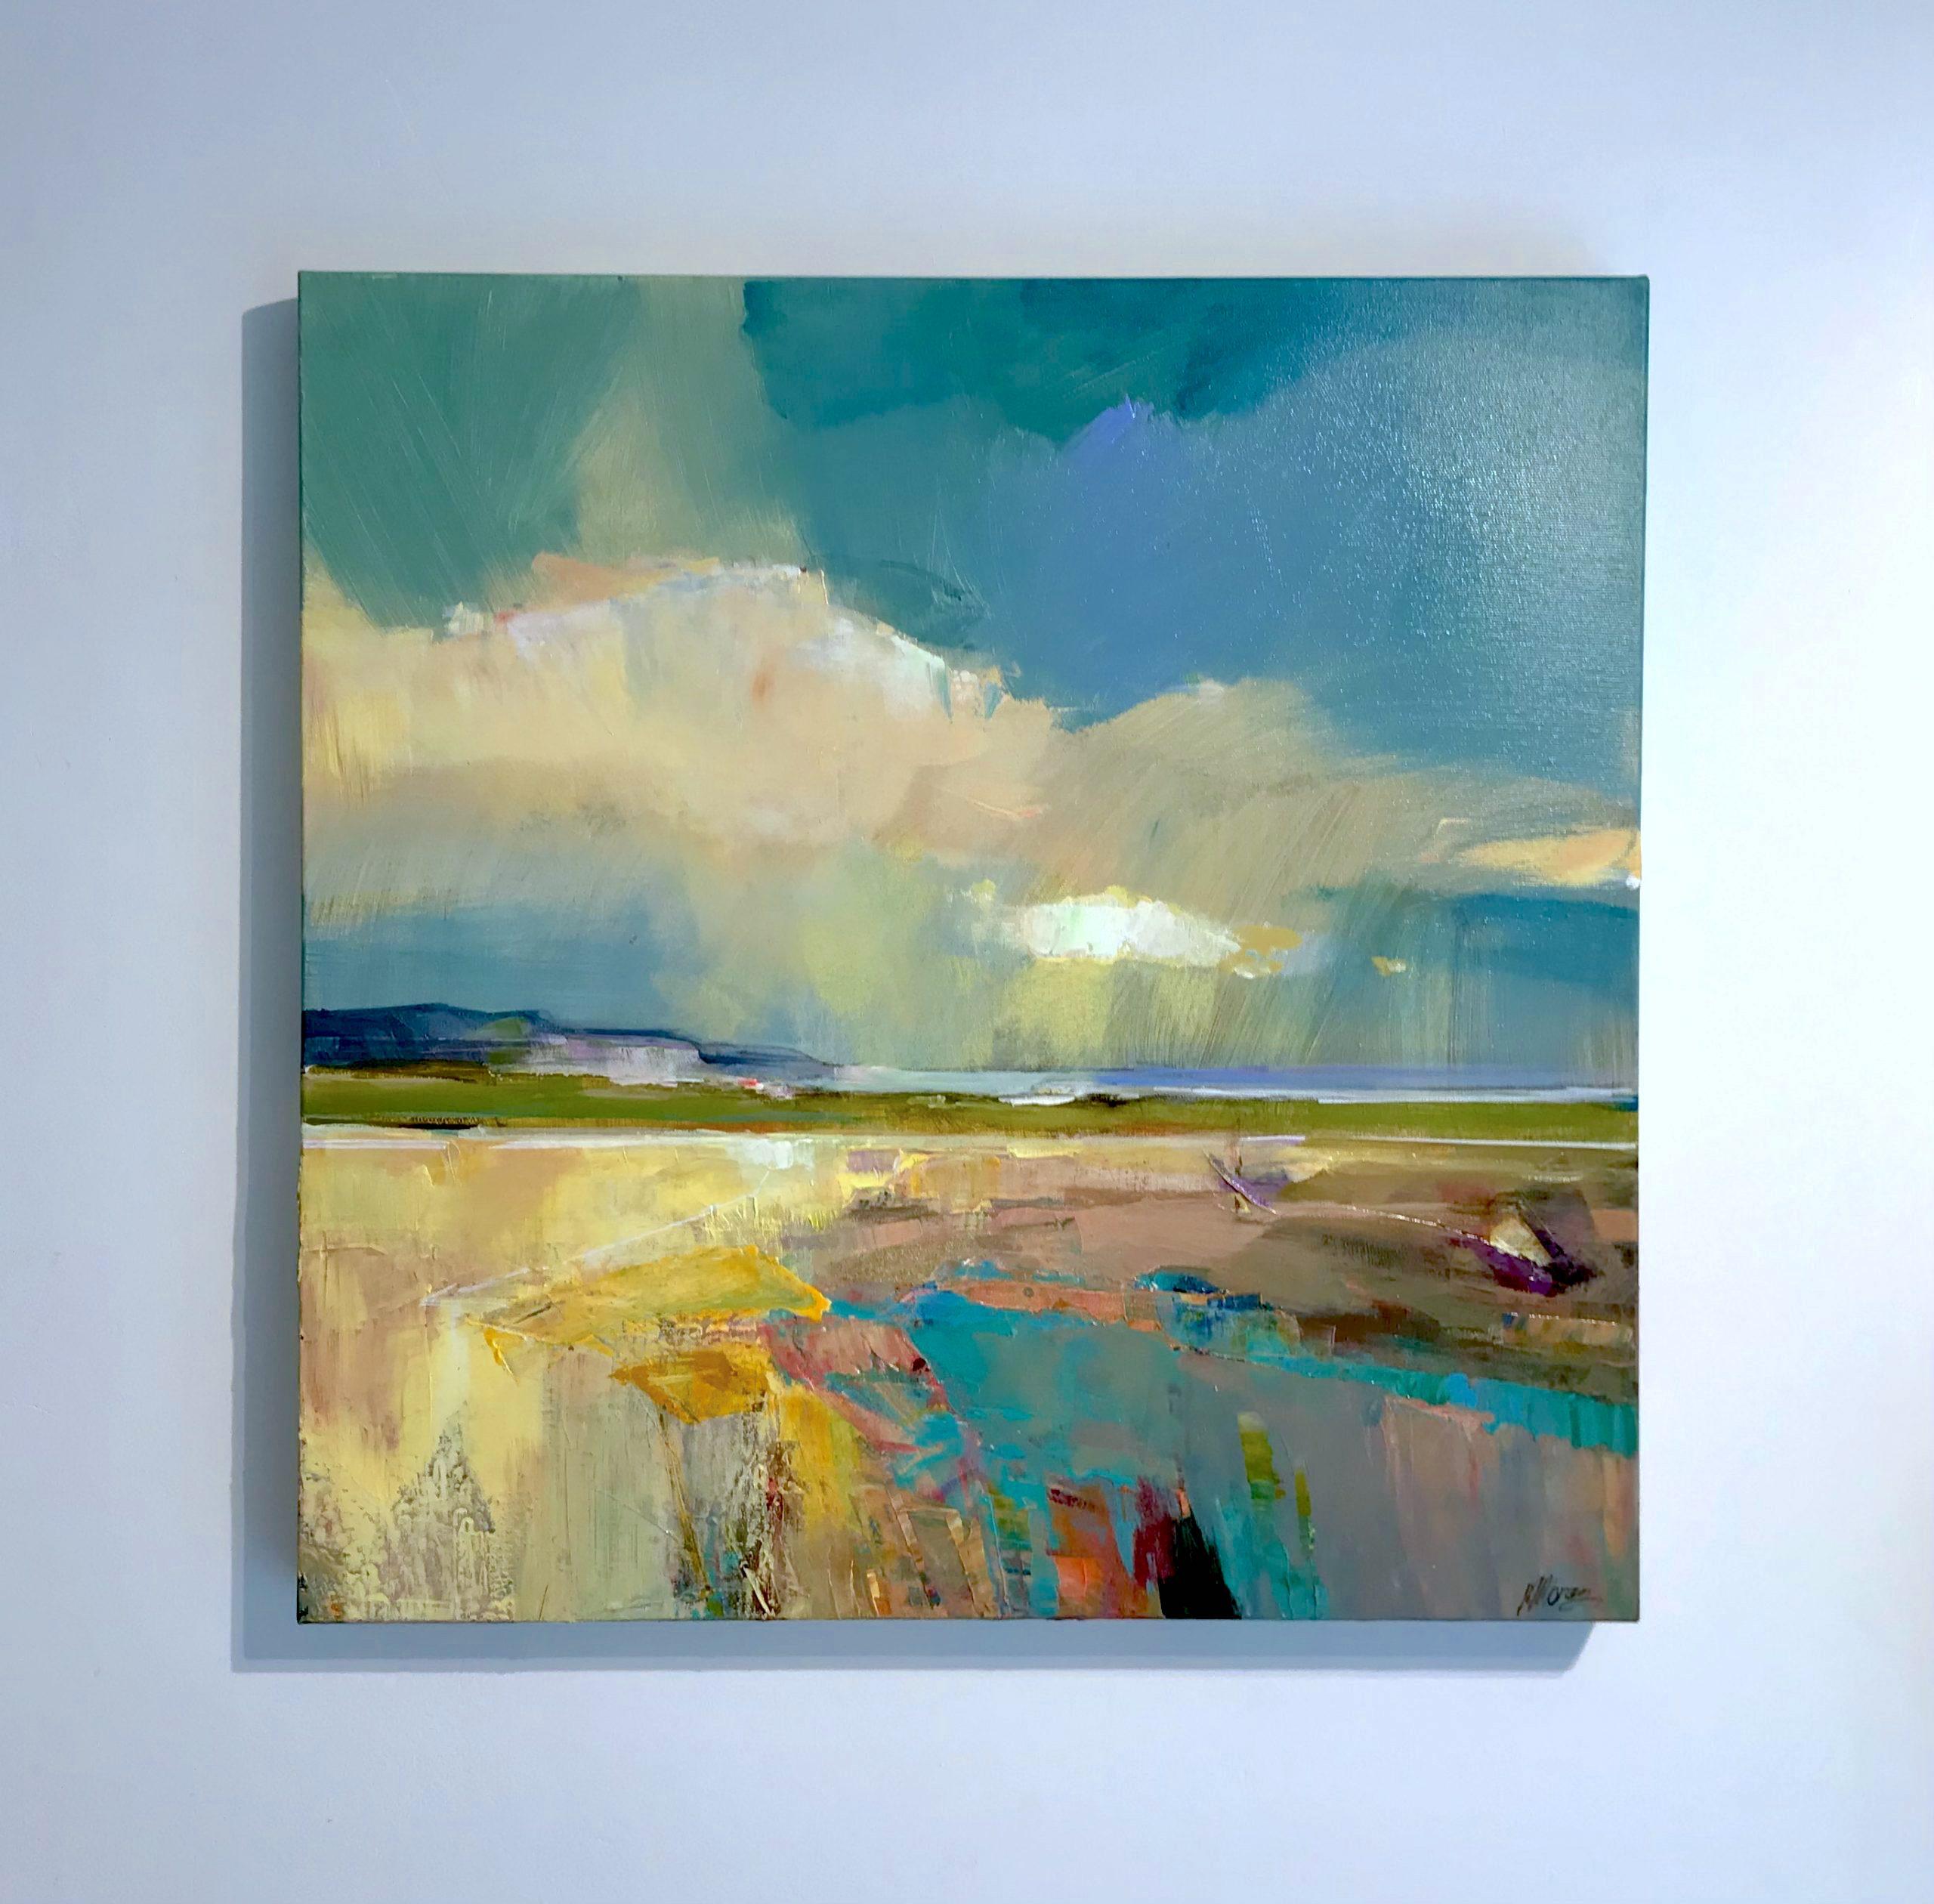 Enjoying Warm Glow 3 -original abstract contemporary landscape painting- modern - Painting by Magdalena Morey